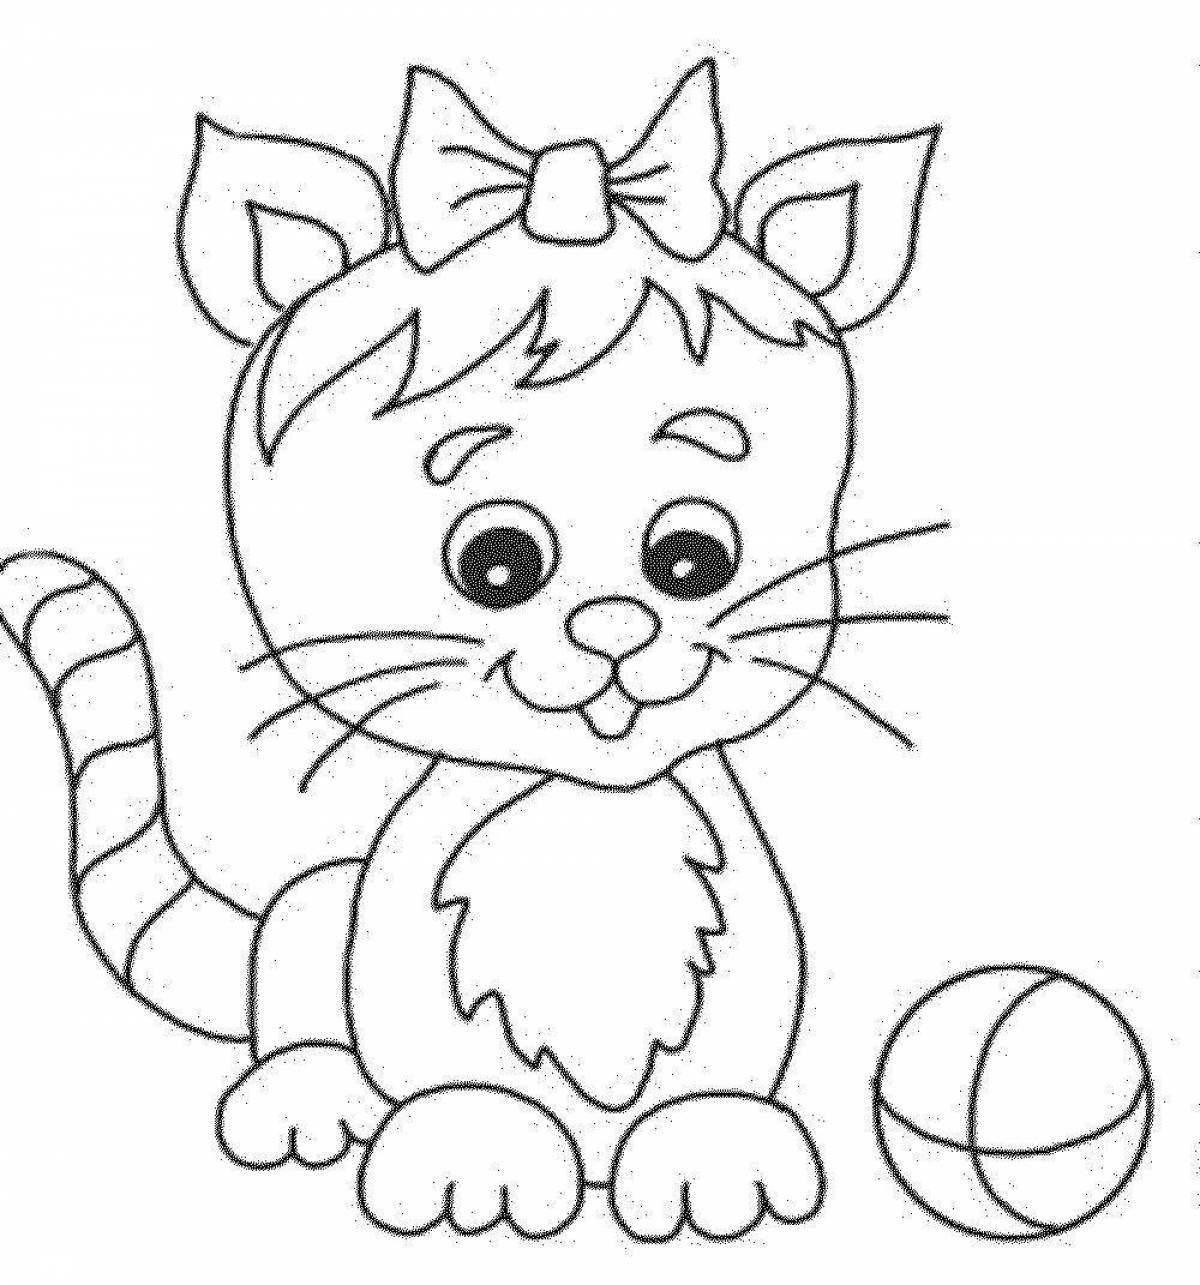 Coloring kitten for children 2-3 years old